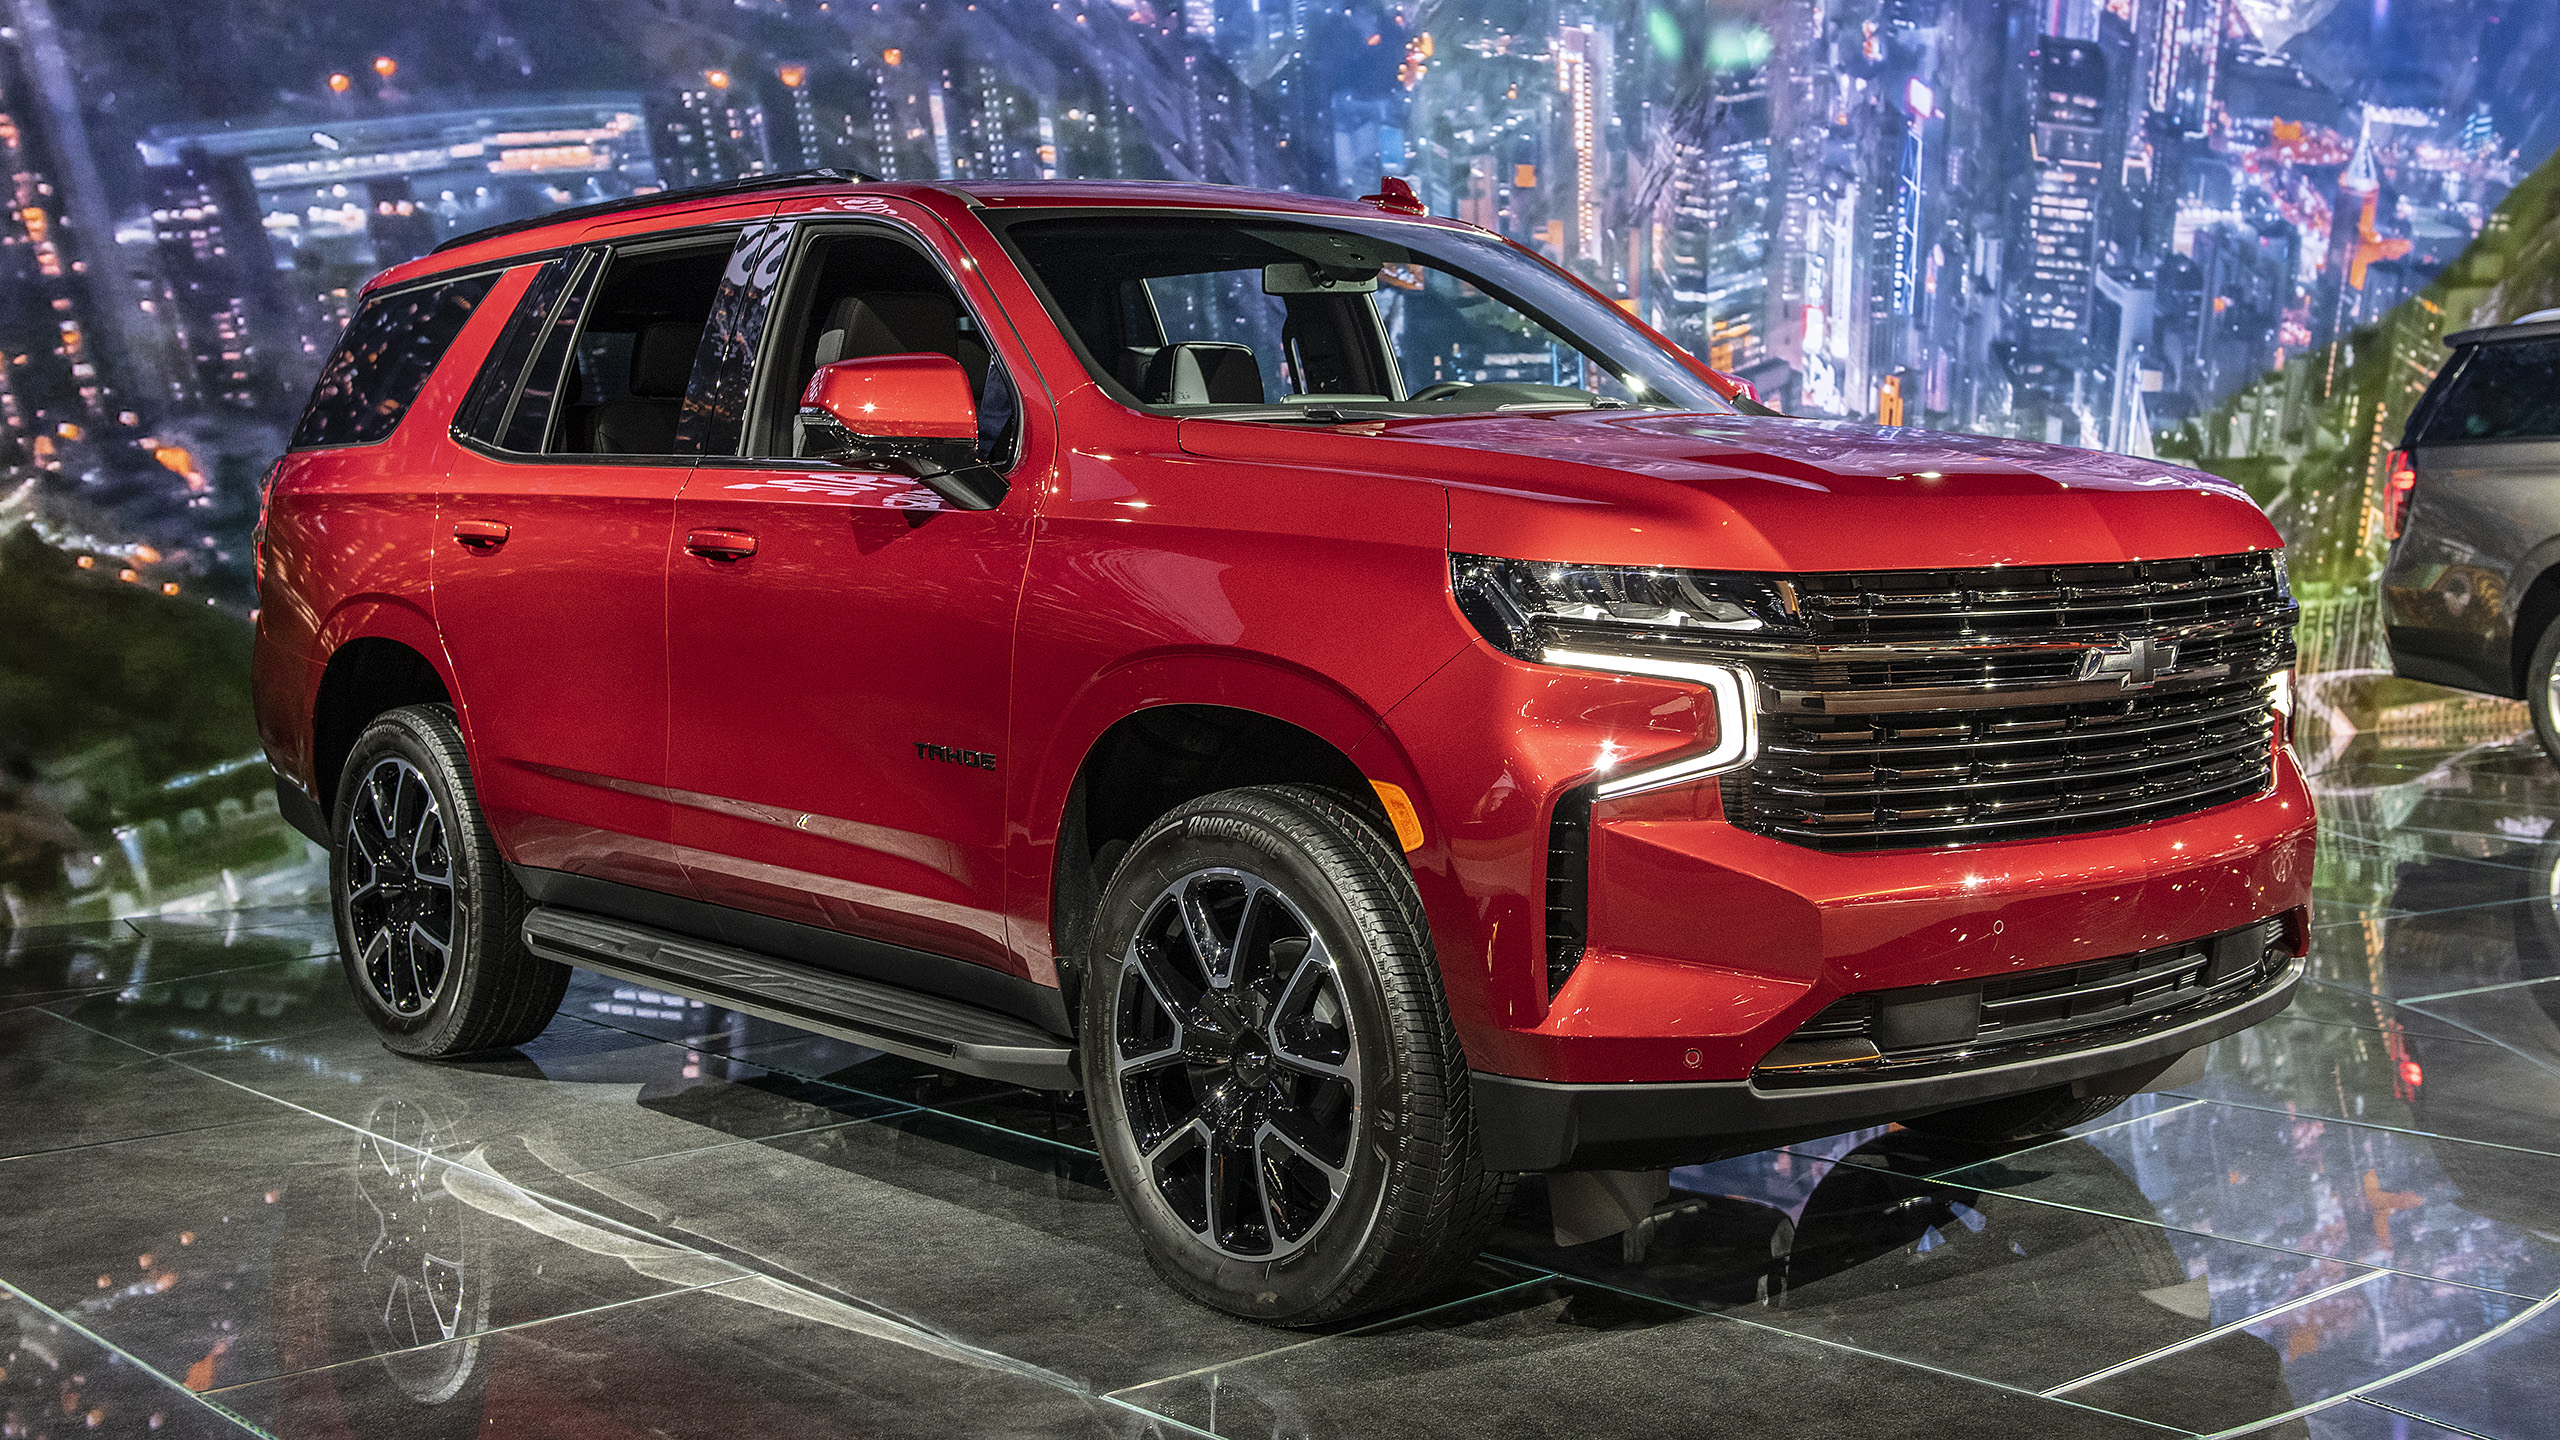 Chevrolet prices 2021 Tahoe from 50,295, up 1,000 from 2020 model